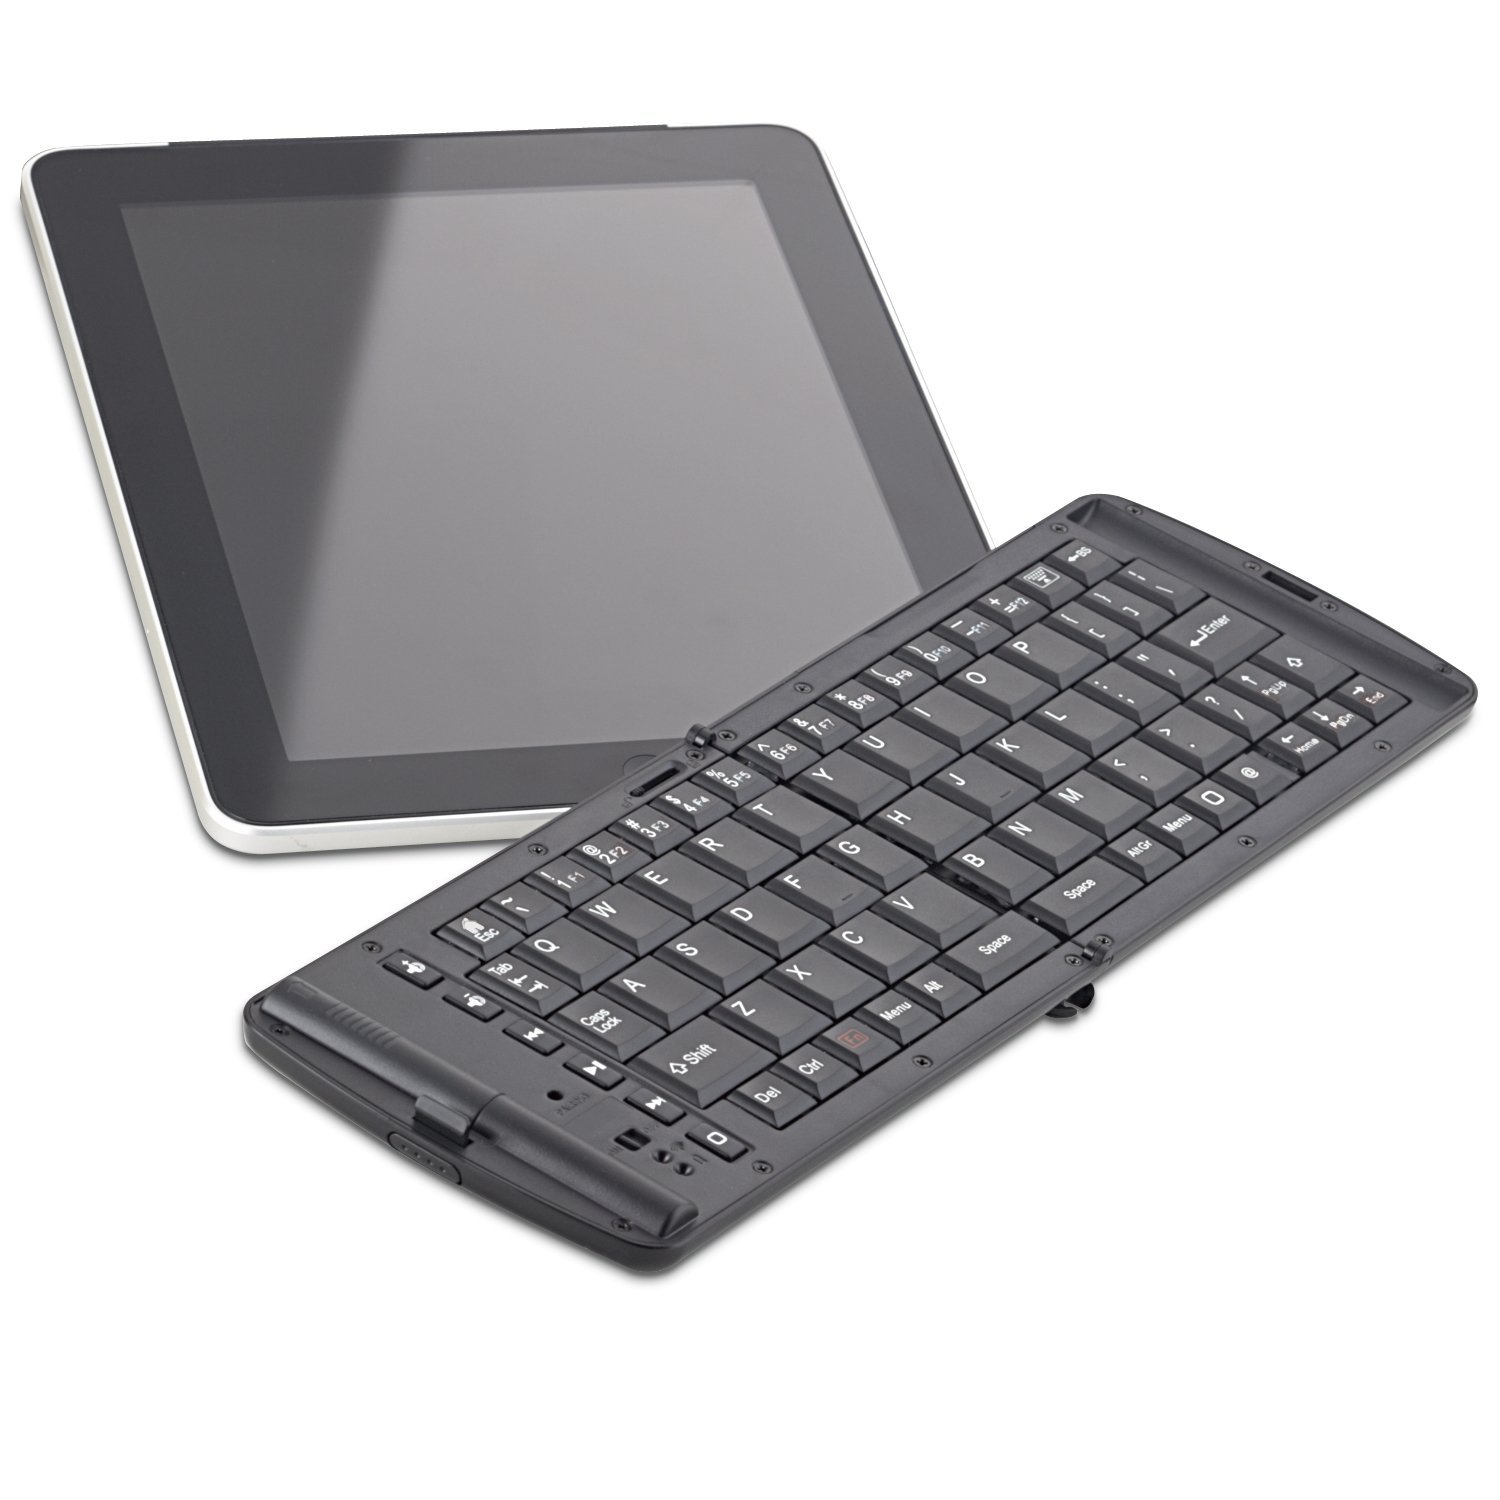 http://thetechjournal.com/wp-content/uploads/images/1110/1319474214-verbatim-97537-wireless-bluetooth-mobile-keyboard-for-all-ios-devices-and-other-tablets-3.jpg